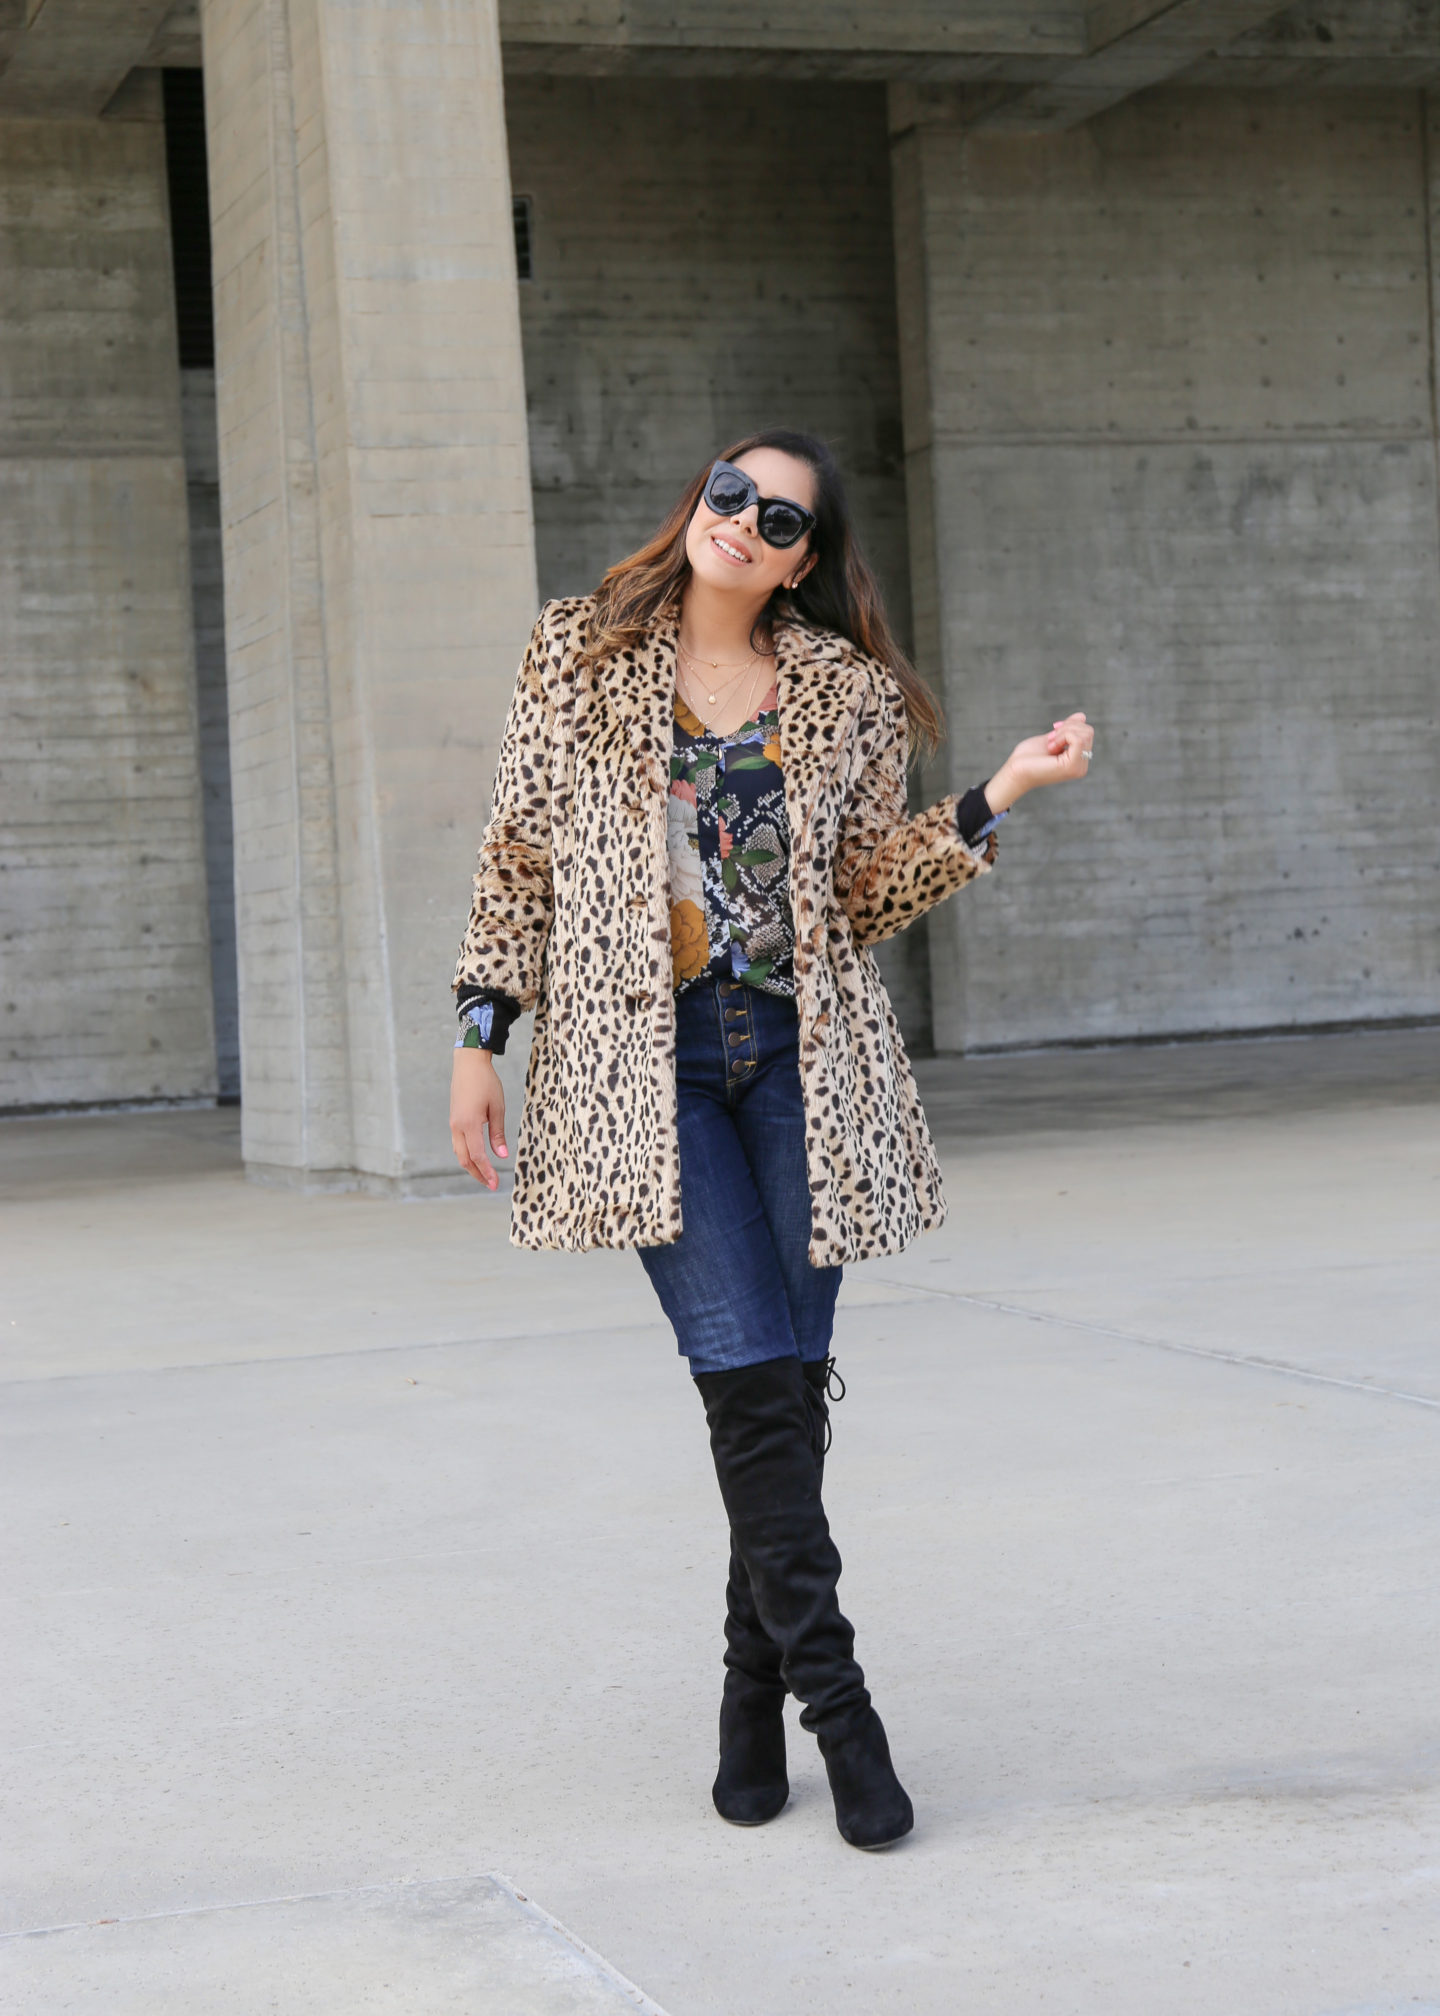 cabi josephine coat, leopard coat and over the knee boots outfit